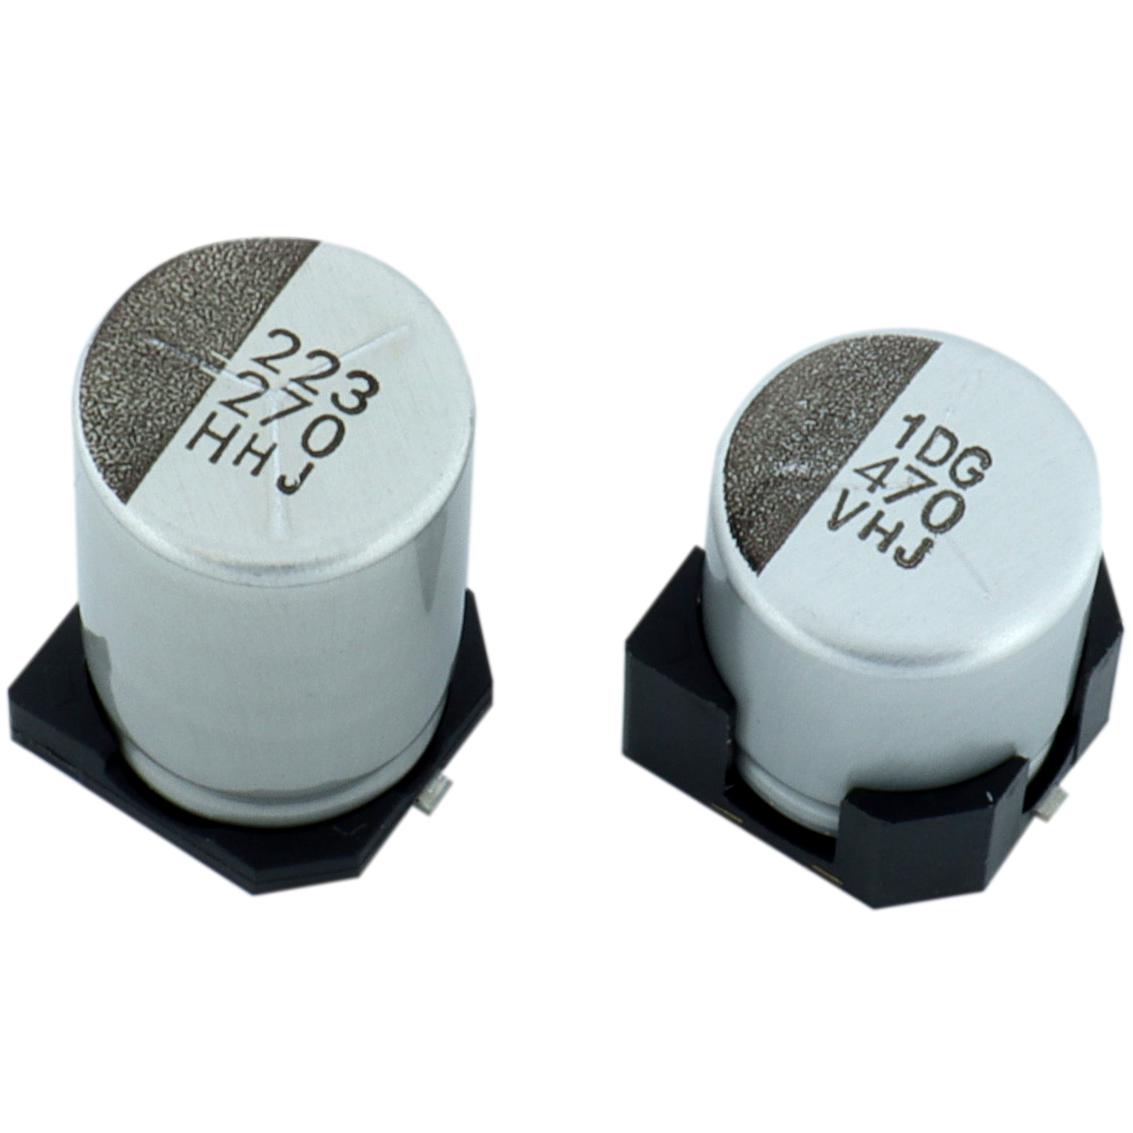 Conductive Polymer Hybrid Aluminum Electrolytic Capacitors from Nippon Chemi-Con